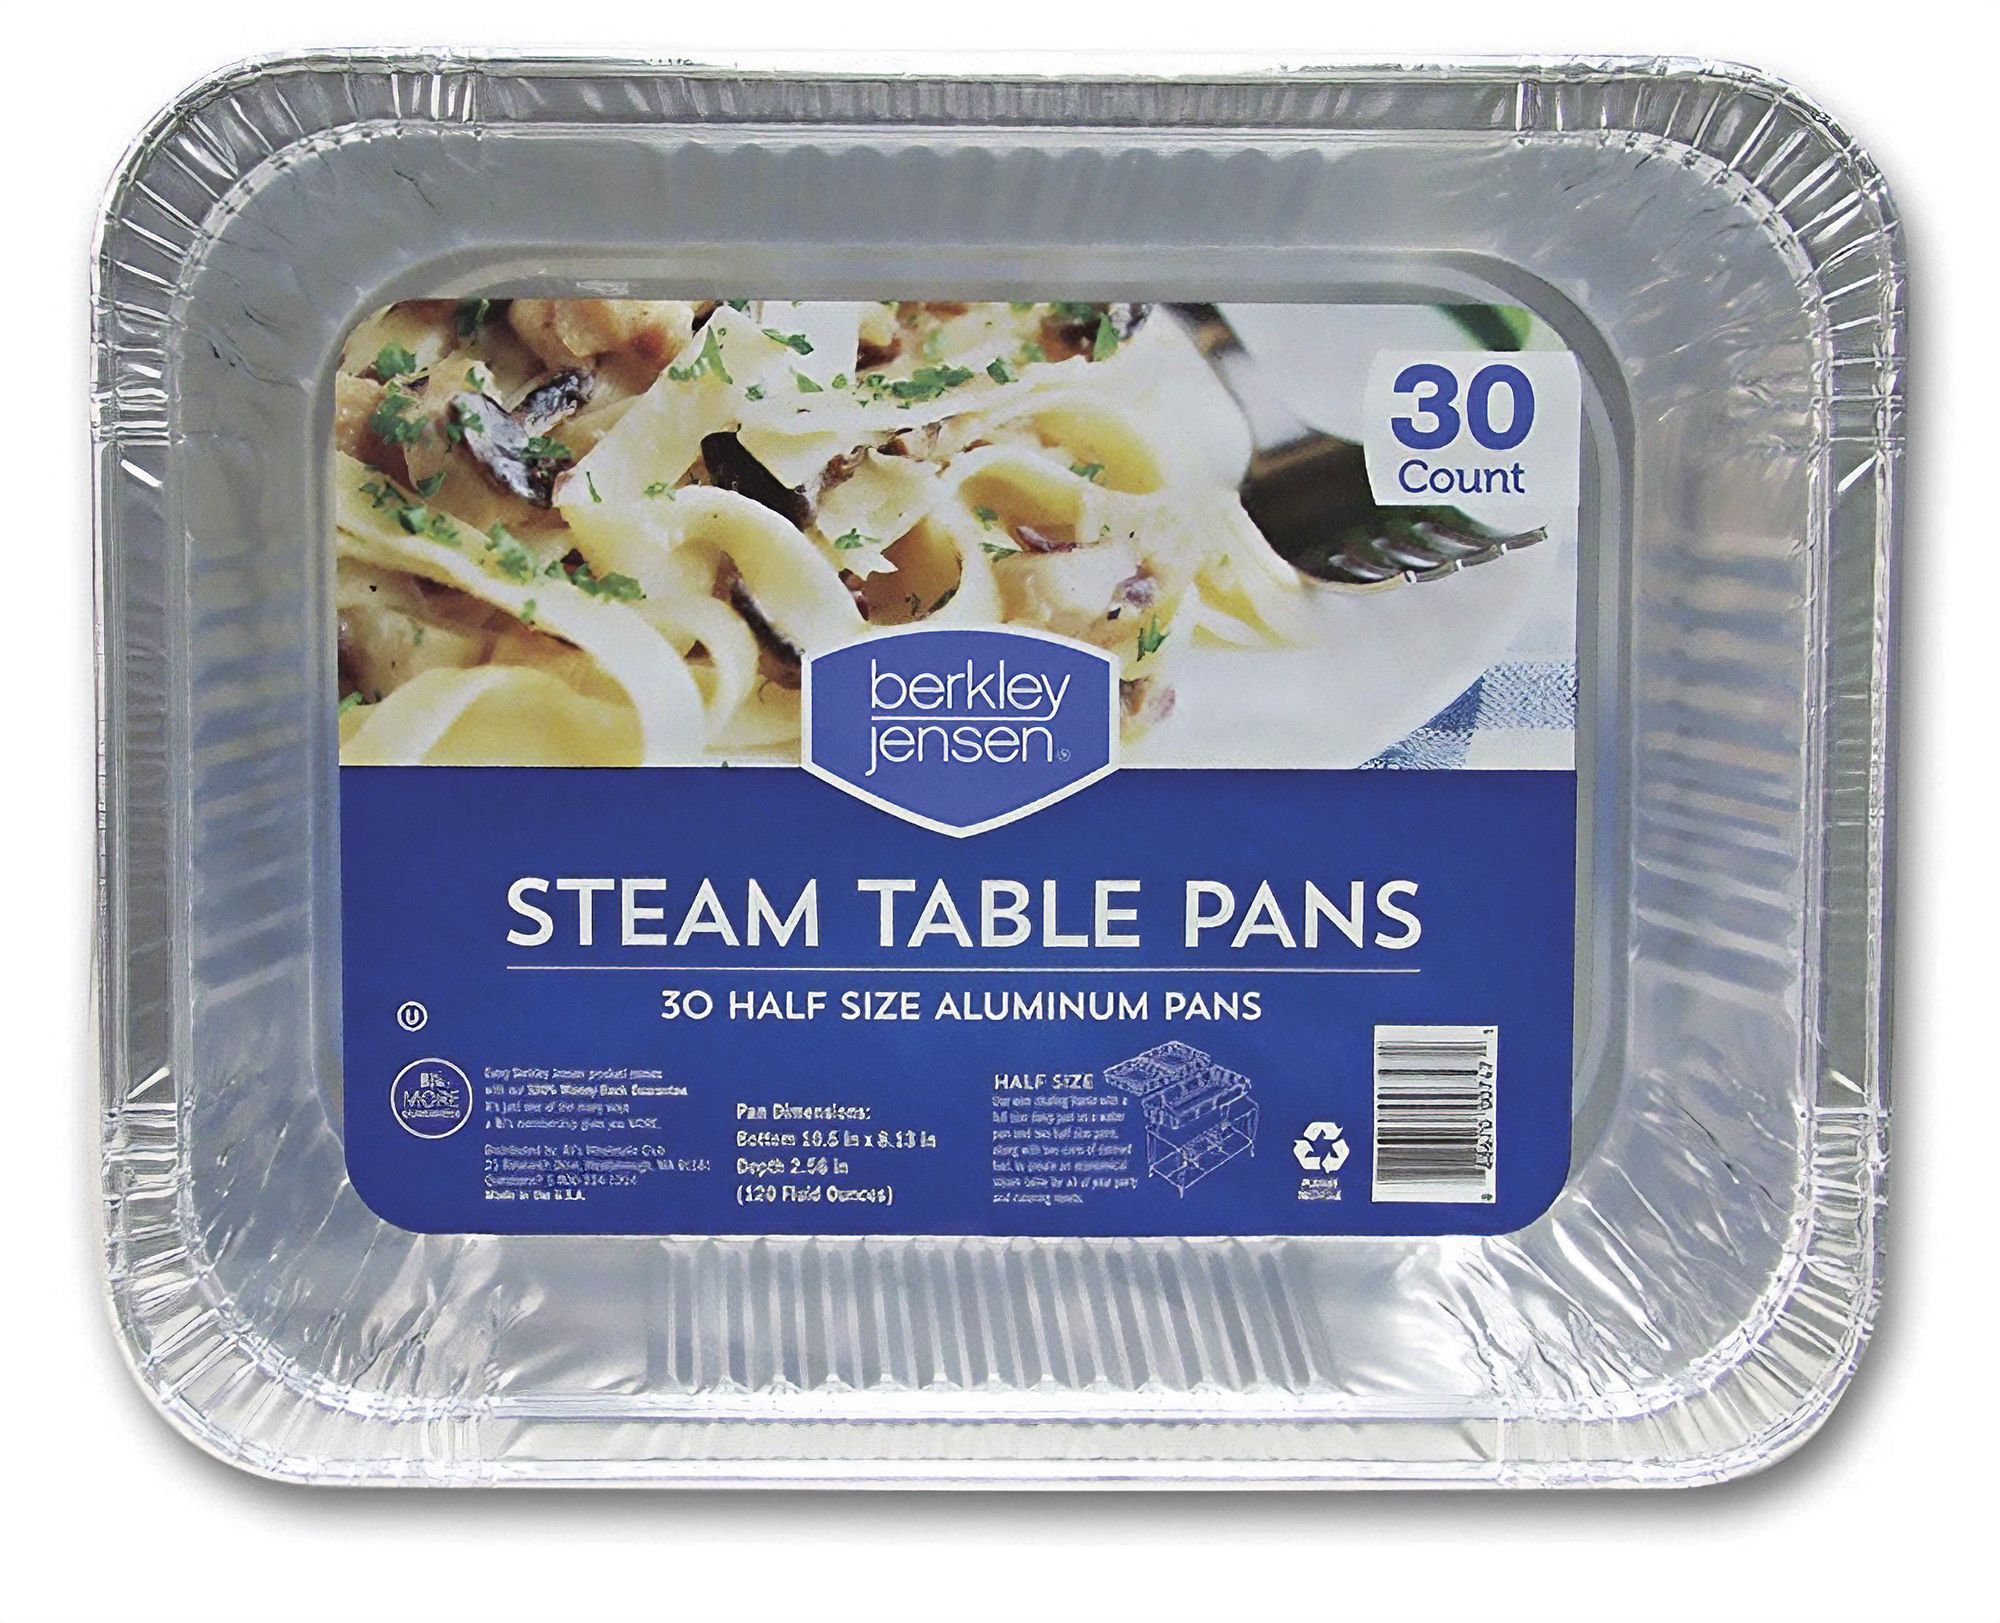 Smart Choice Disposable Aluminum Pans with Lids, (10 Pack) 9x13 Pans, Half size, Steam Table Pans, 12.75 x 10.5 x 2.25, Baking, Roasting, Chafing